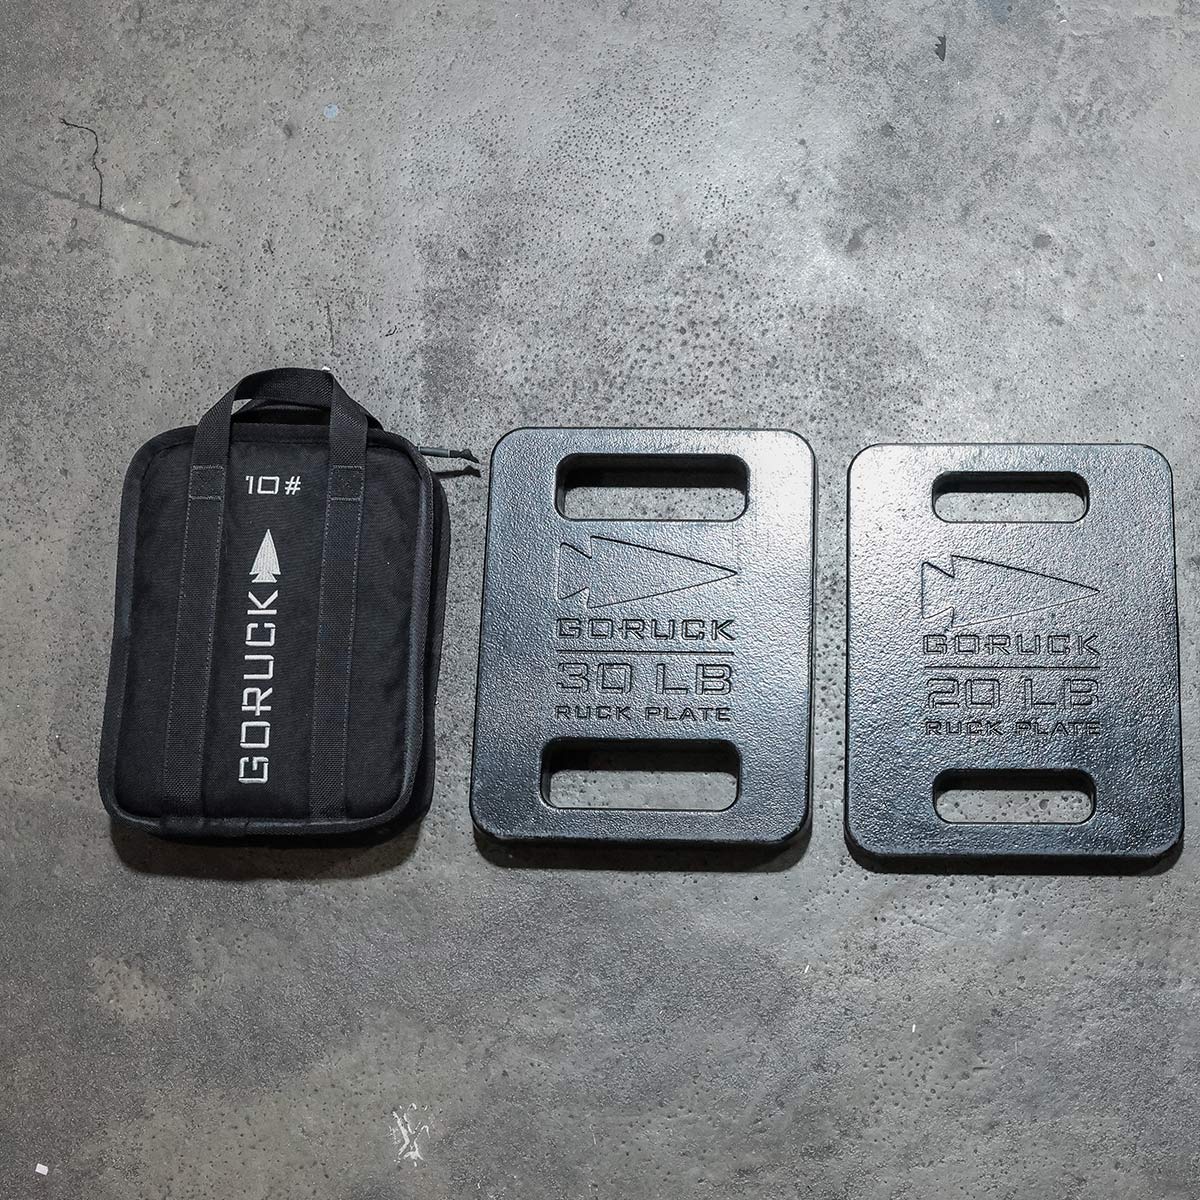 Sand Ruck Plates